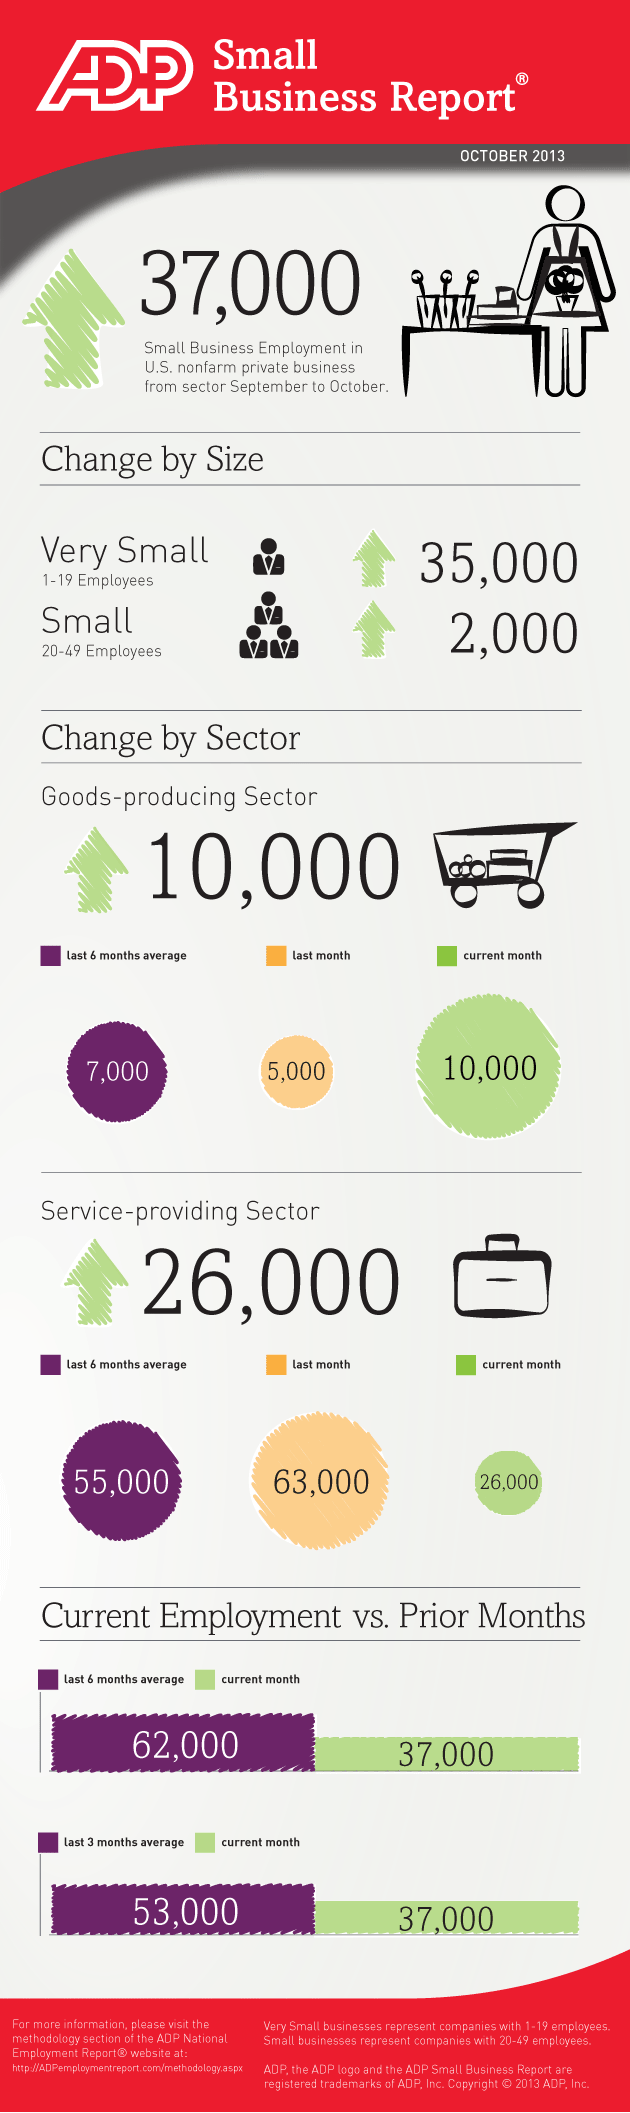 Small Businesses Created 37,000 Jobs in October Infographic